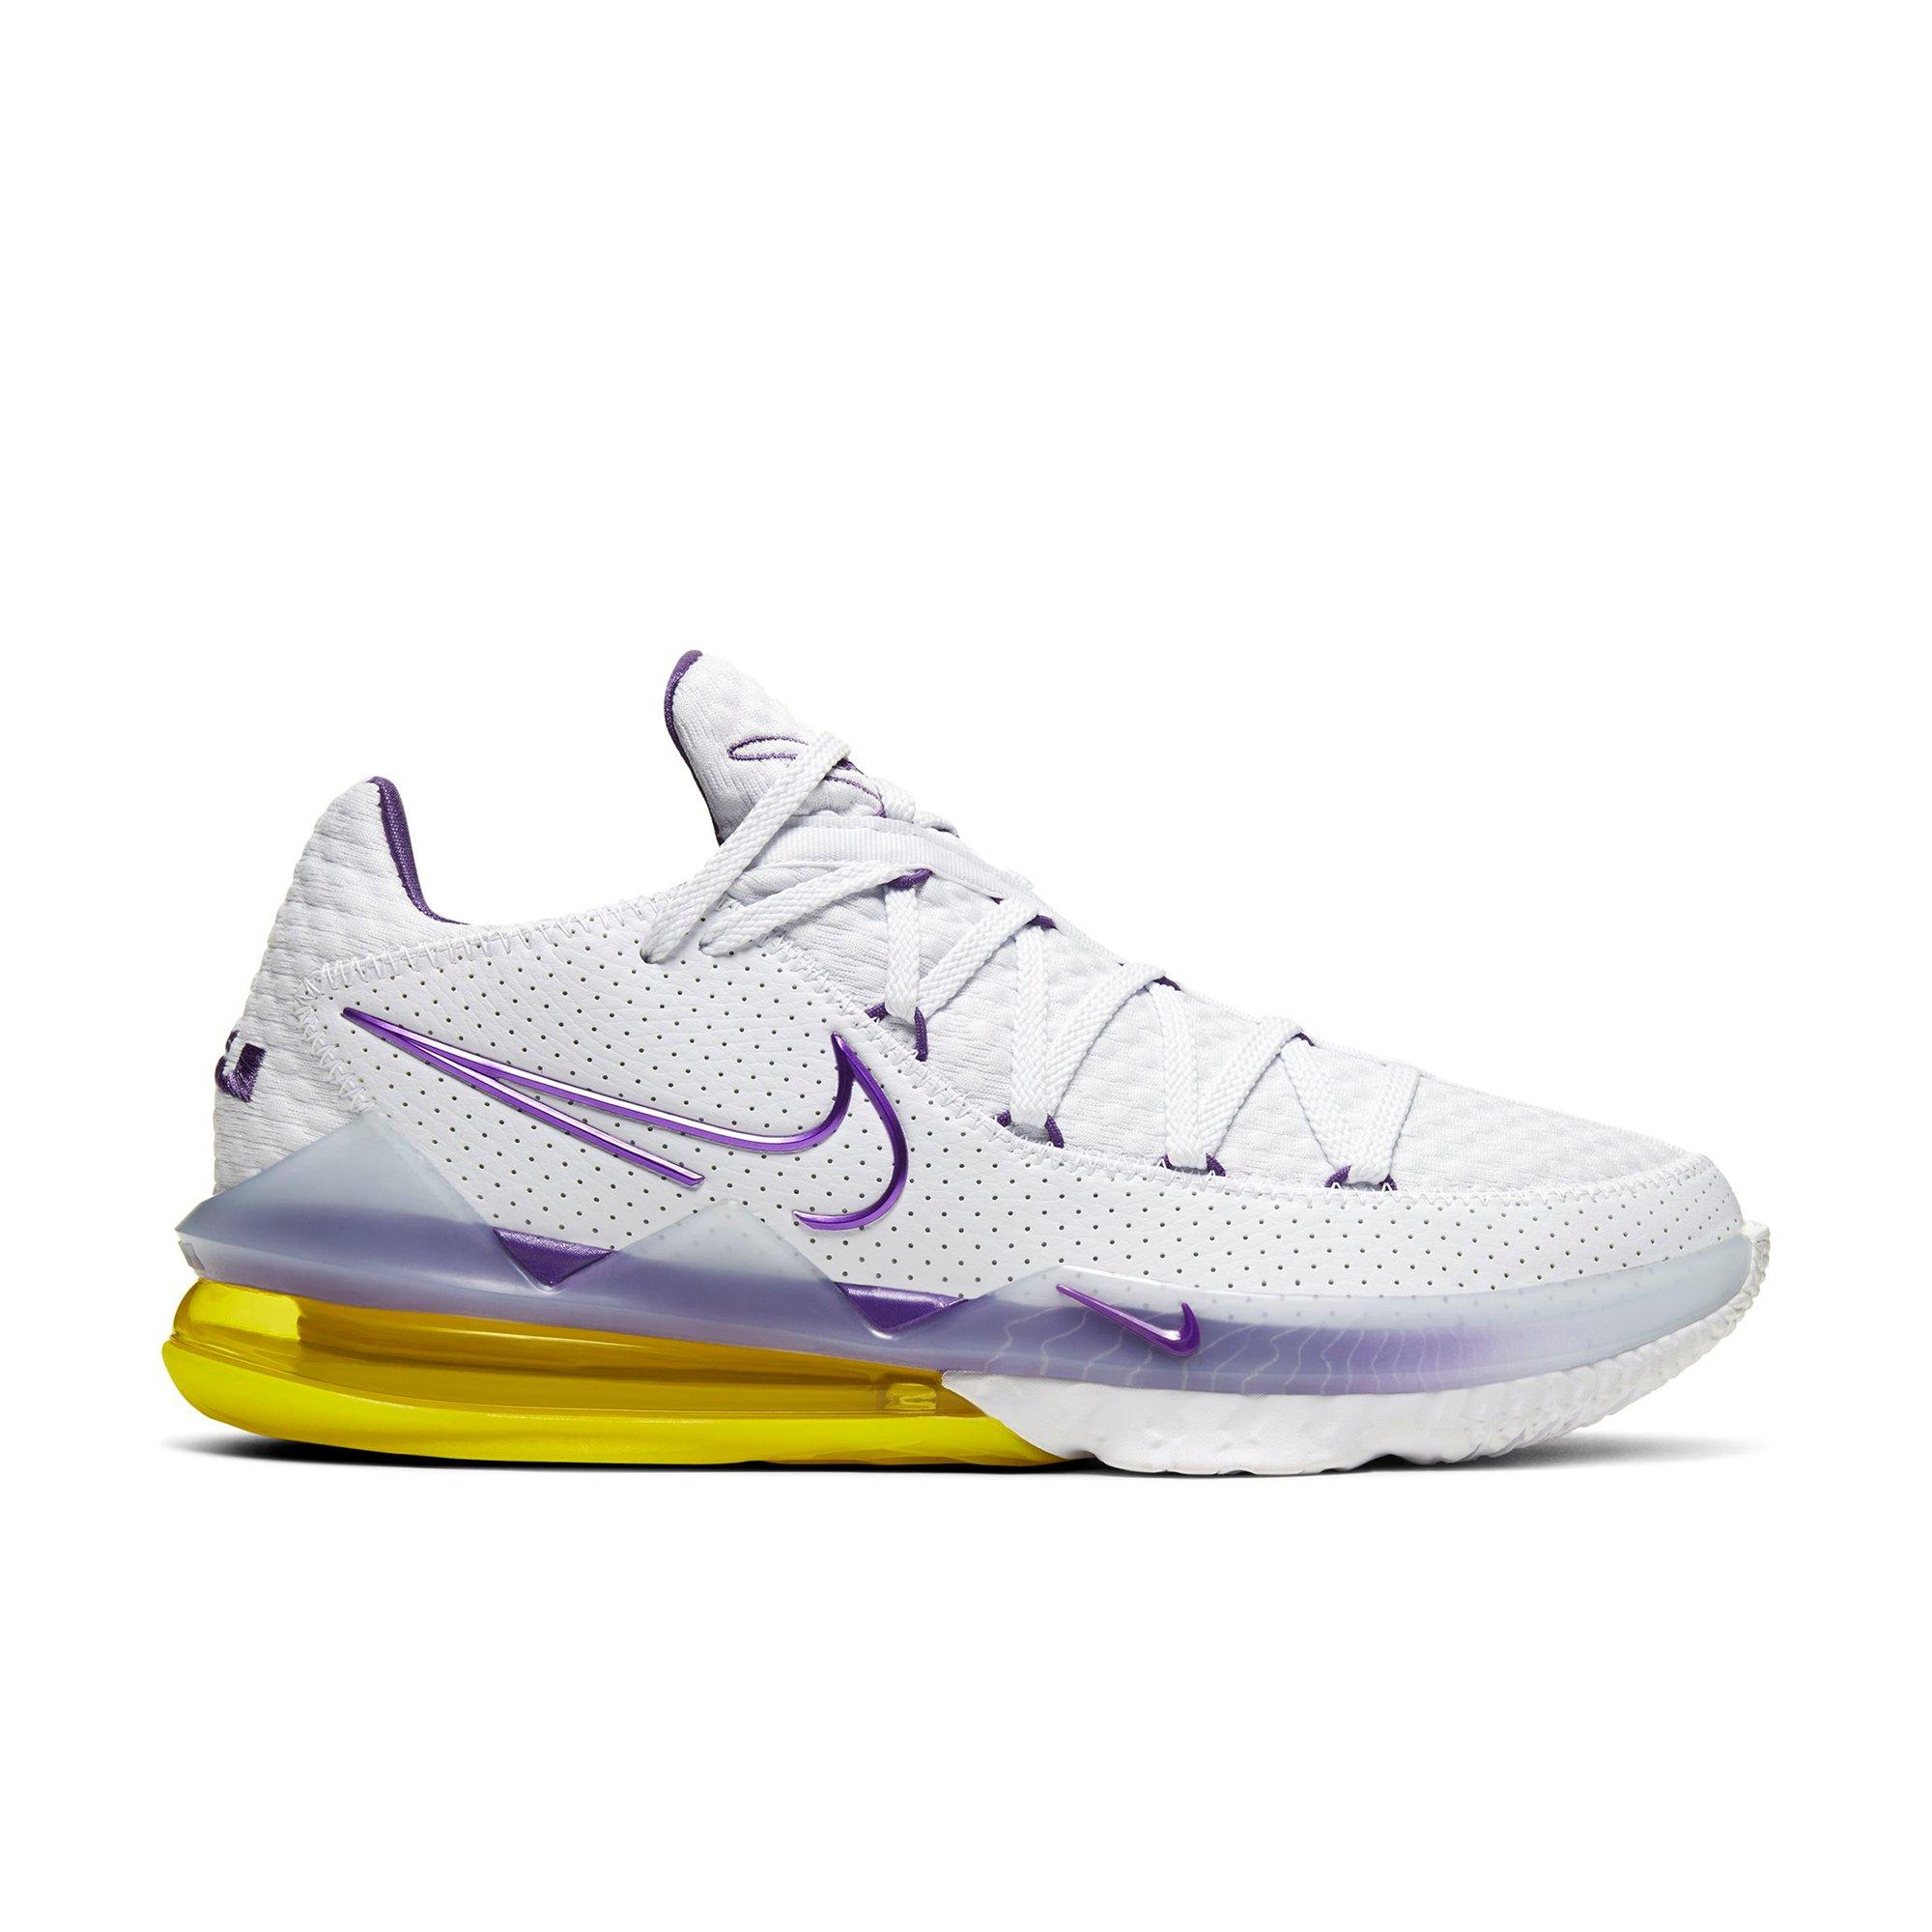 purple and white lebron james shoes